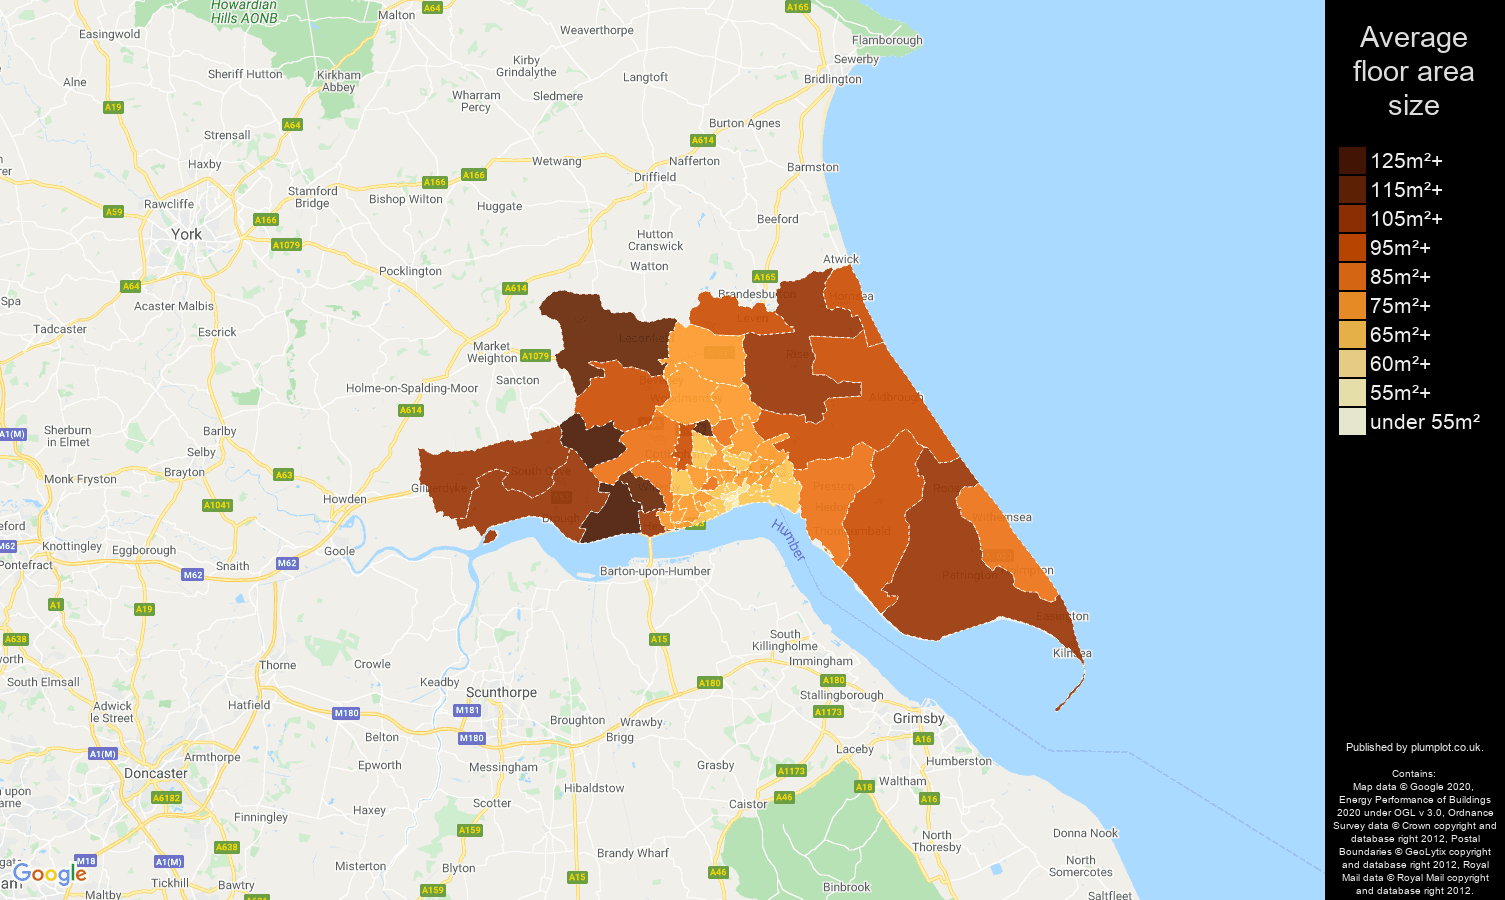 Hull map of average floor area size of properties